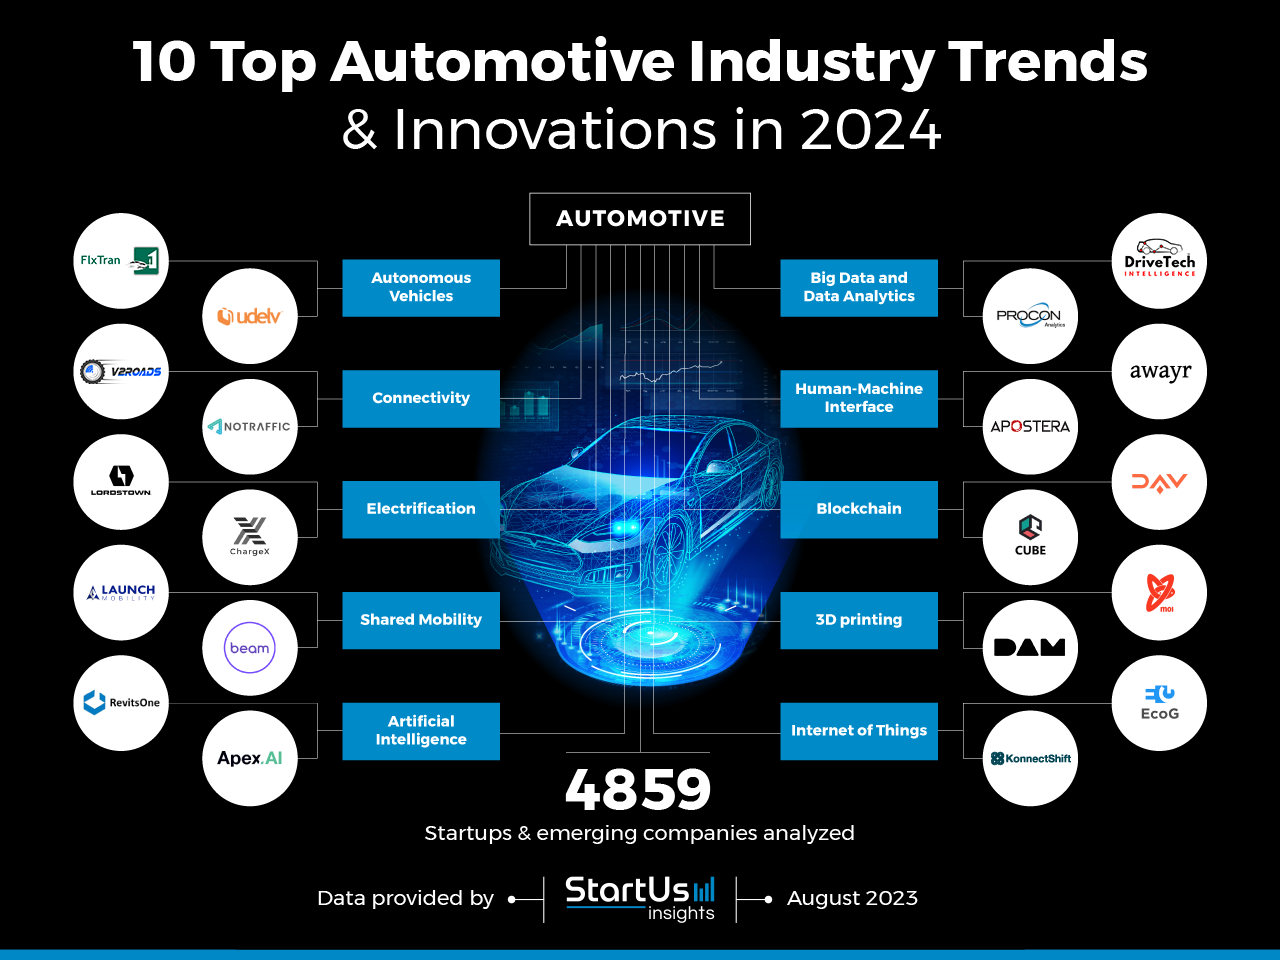 Top 10 Automotive Industry Trends StartUs Insights